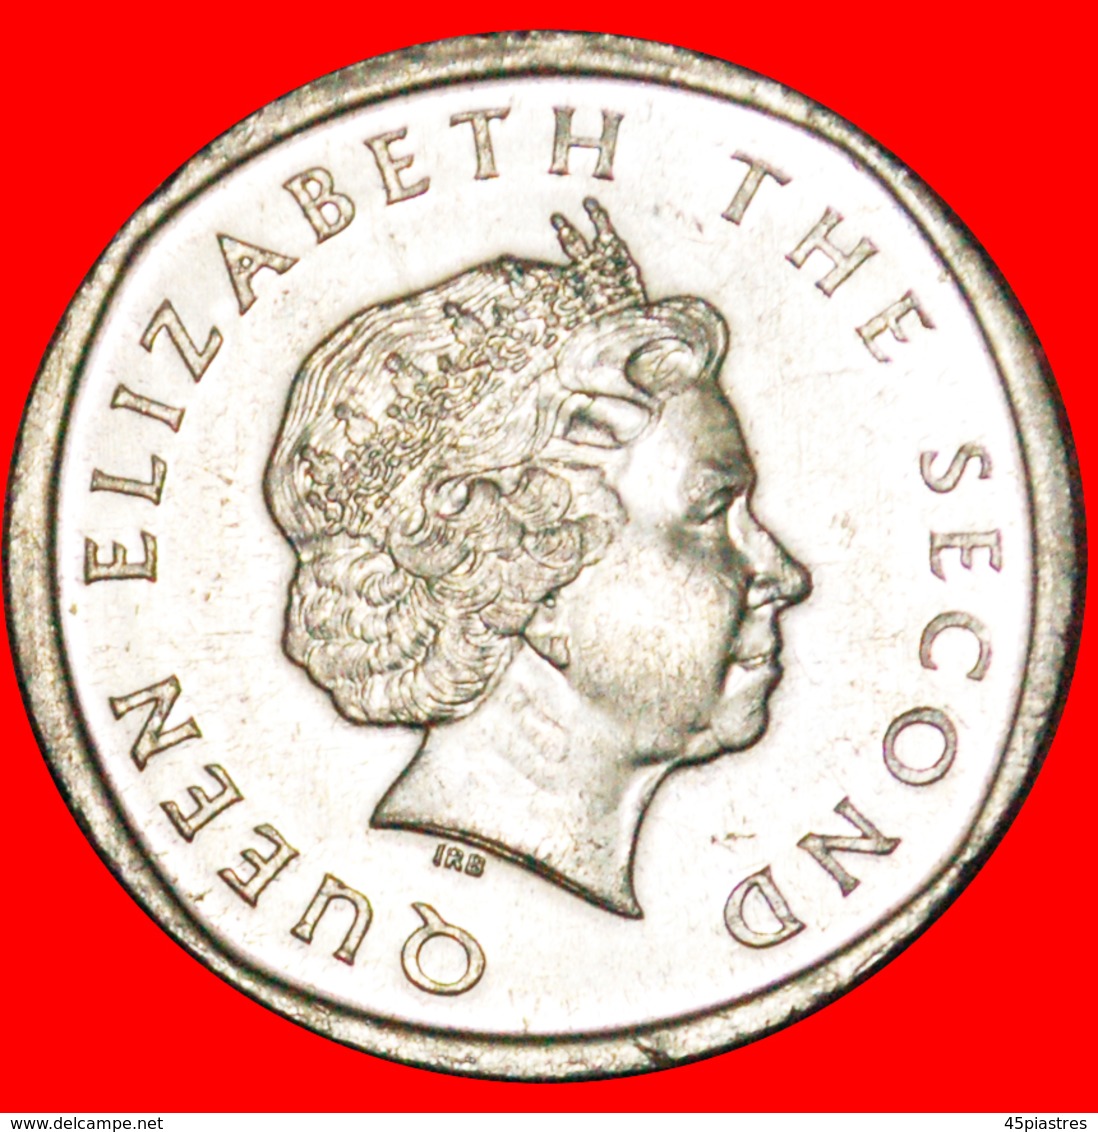 · ROUND (2002-2011): EAST CARIBBEAN TERRITORIES ★ 2 CENTS 2004 MINT LUSTER! LOW START ★ NO RESERVE! - East Caribbean States